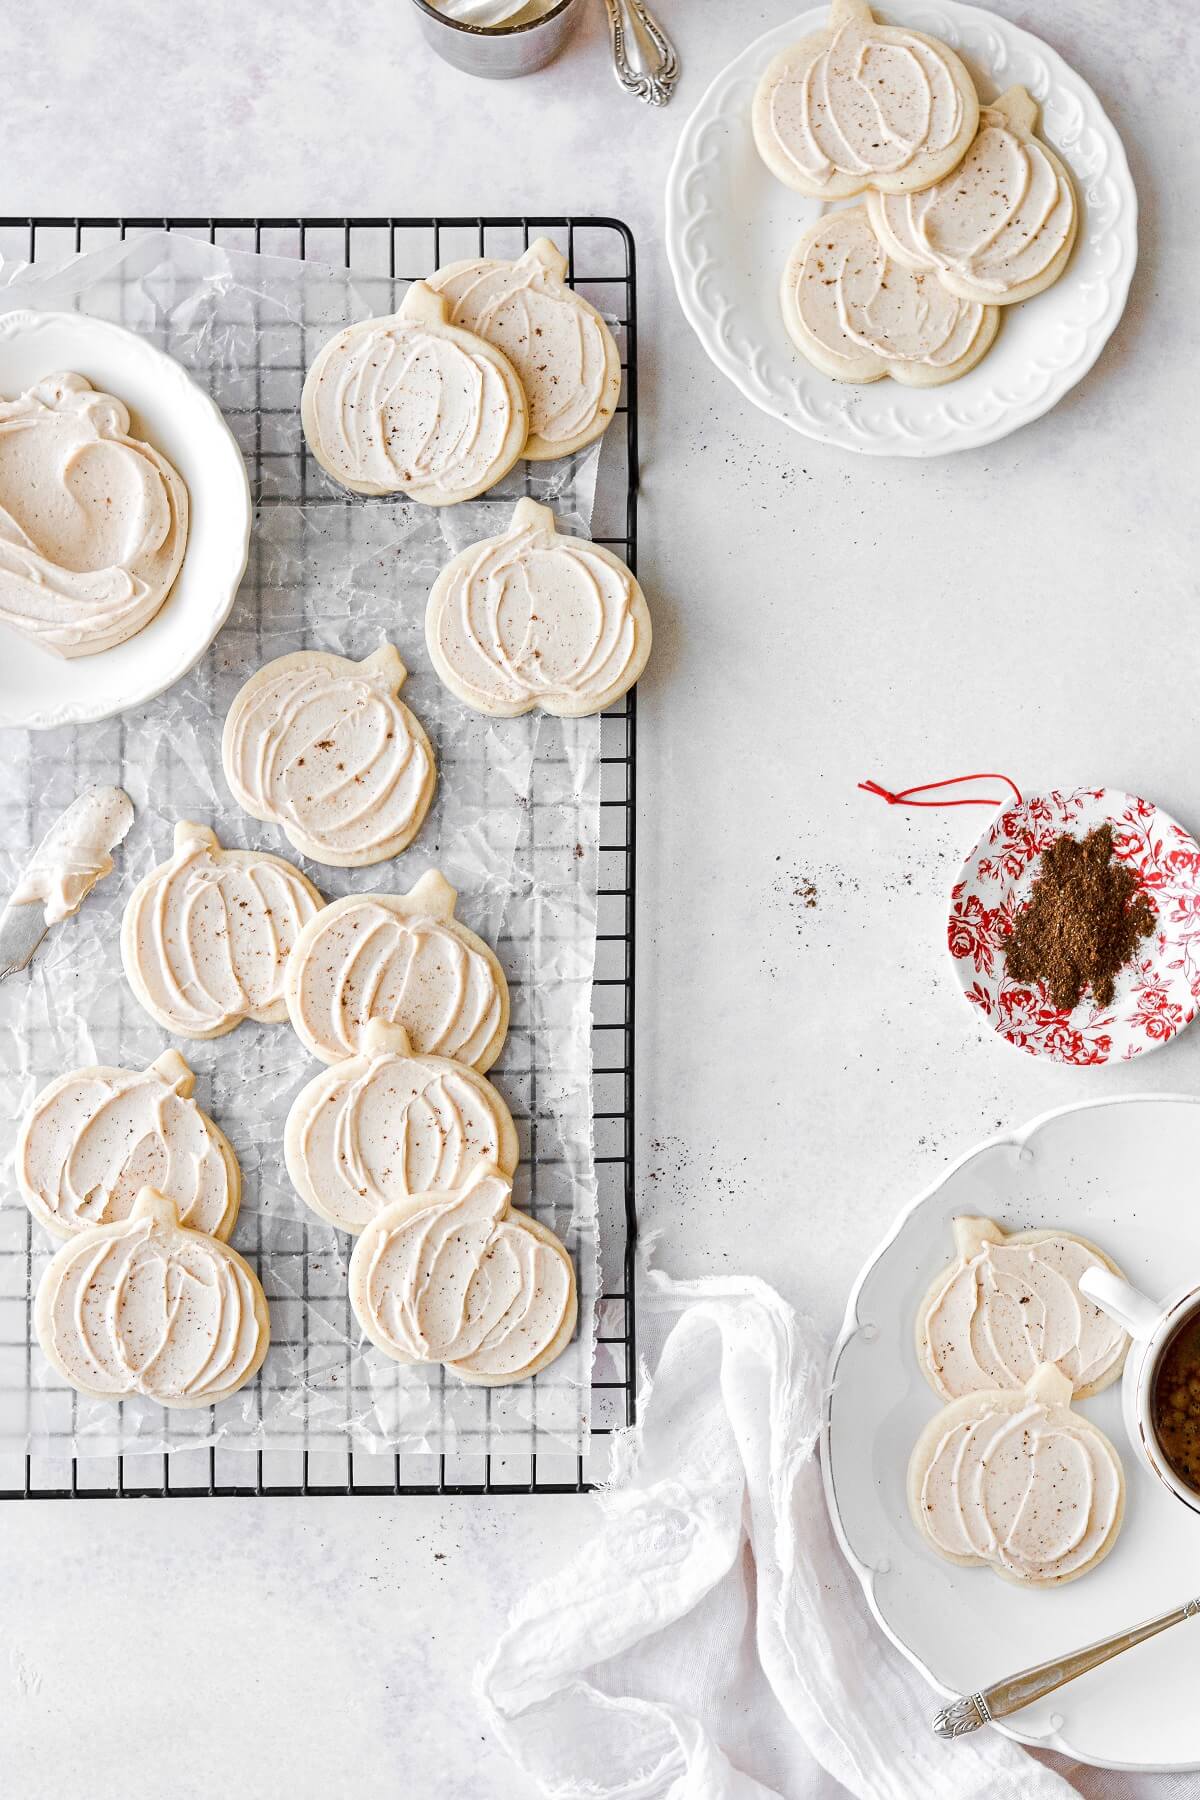 Pumpkin sugar cookies with maple frosting, dusted with nutmeg.